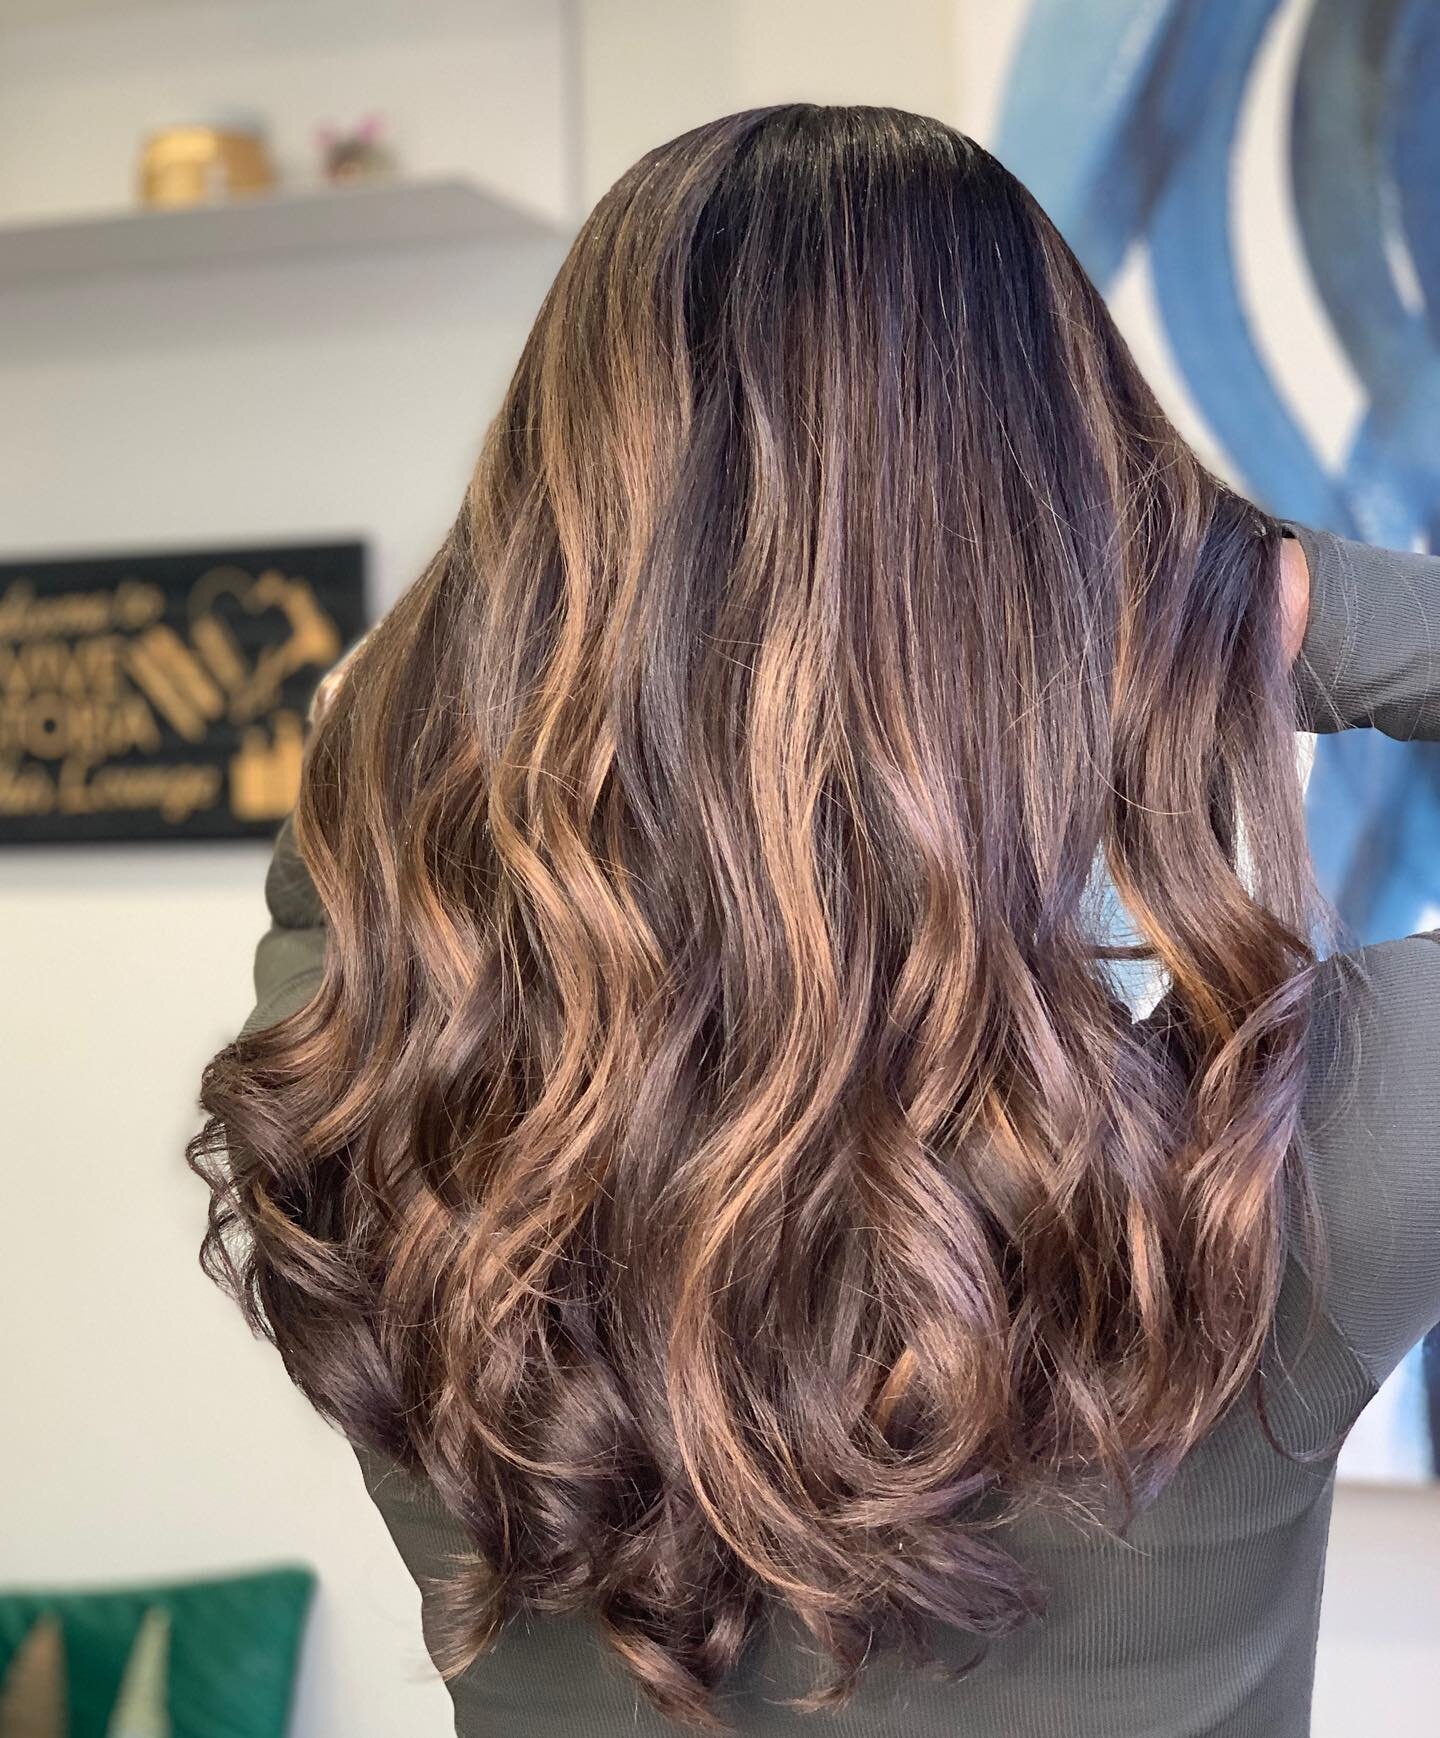 Revive by Andy Lam #bayalage #ombrehair #oleplex #platinumblonde #instahair #hairgoals #stylist #highlights #hairsalon #hairstylist #hairbyme #haircolorist #hairartist #cutandcolor #colorexpert #colorcorrection #behindthechair #astoria #astoriavibes 